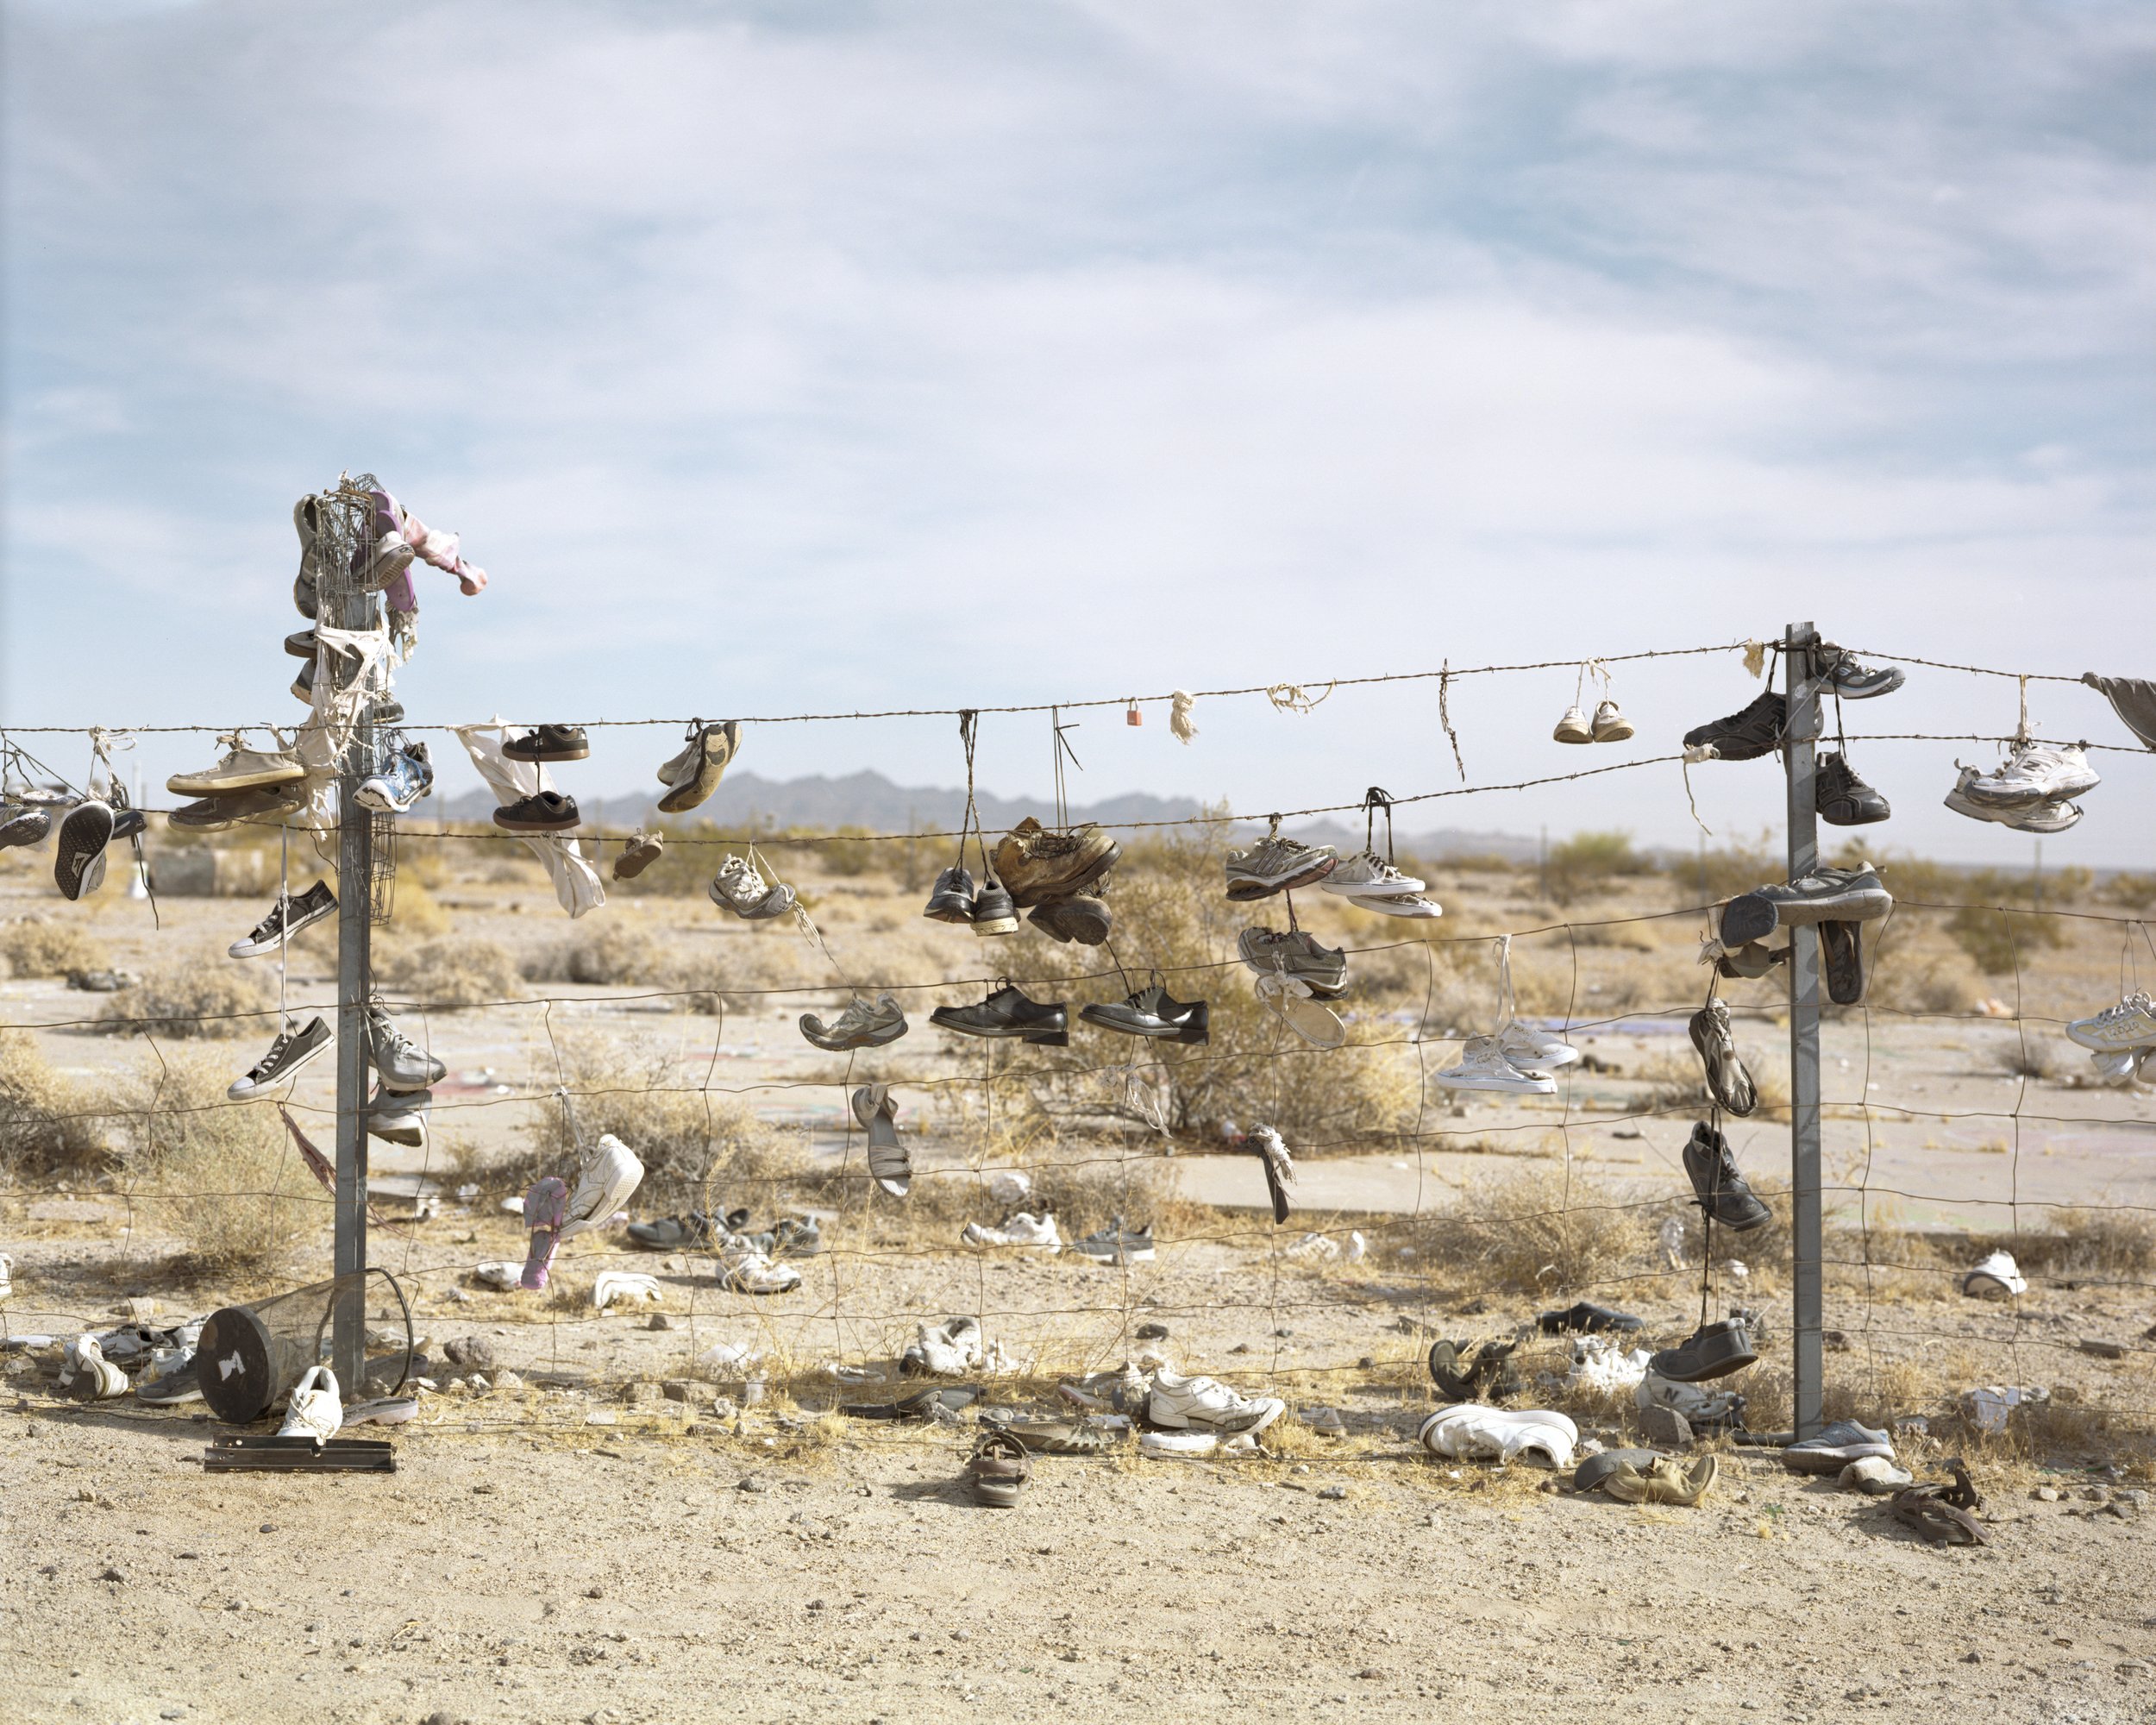  Shoes on Fence, 2021 Archival pigment print   Writing    Film    Installation  